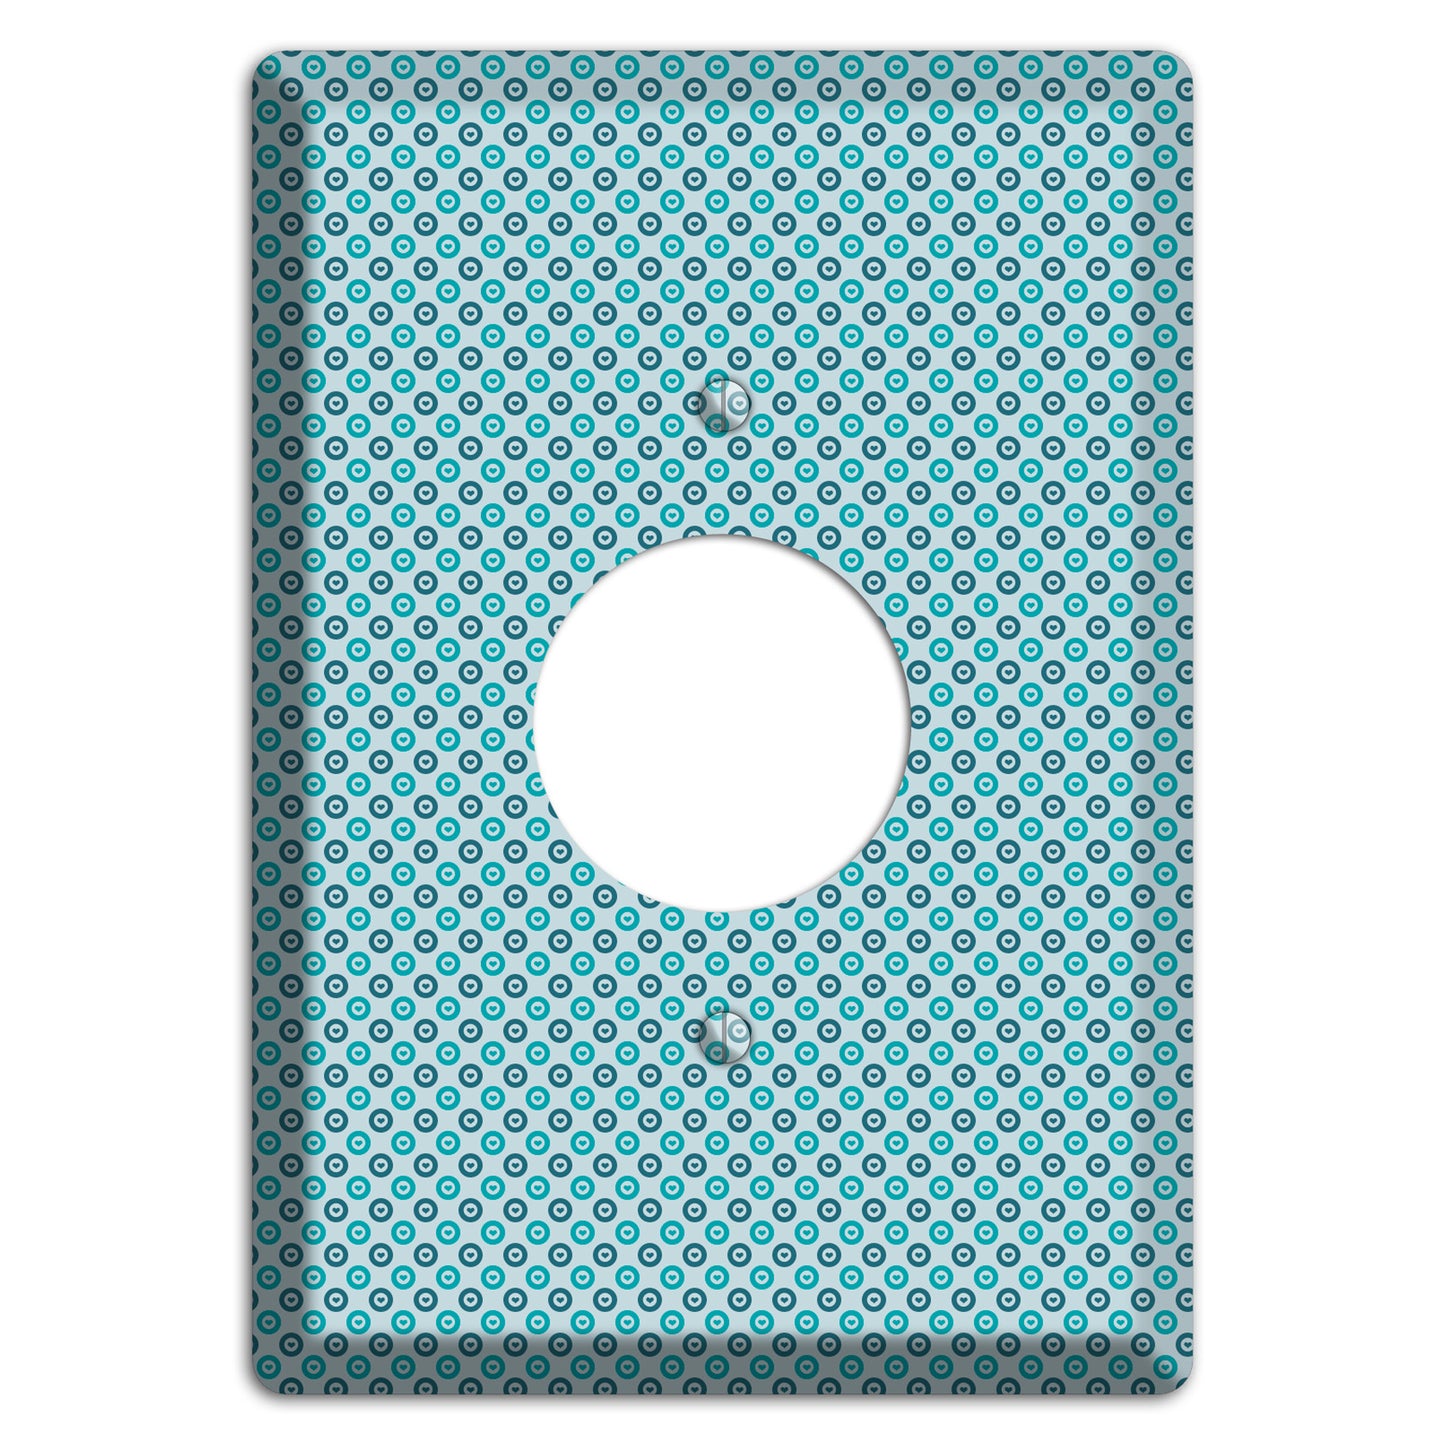 Turquoise and Blue Concentric Dots Single Receptacle Wallplate